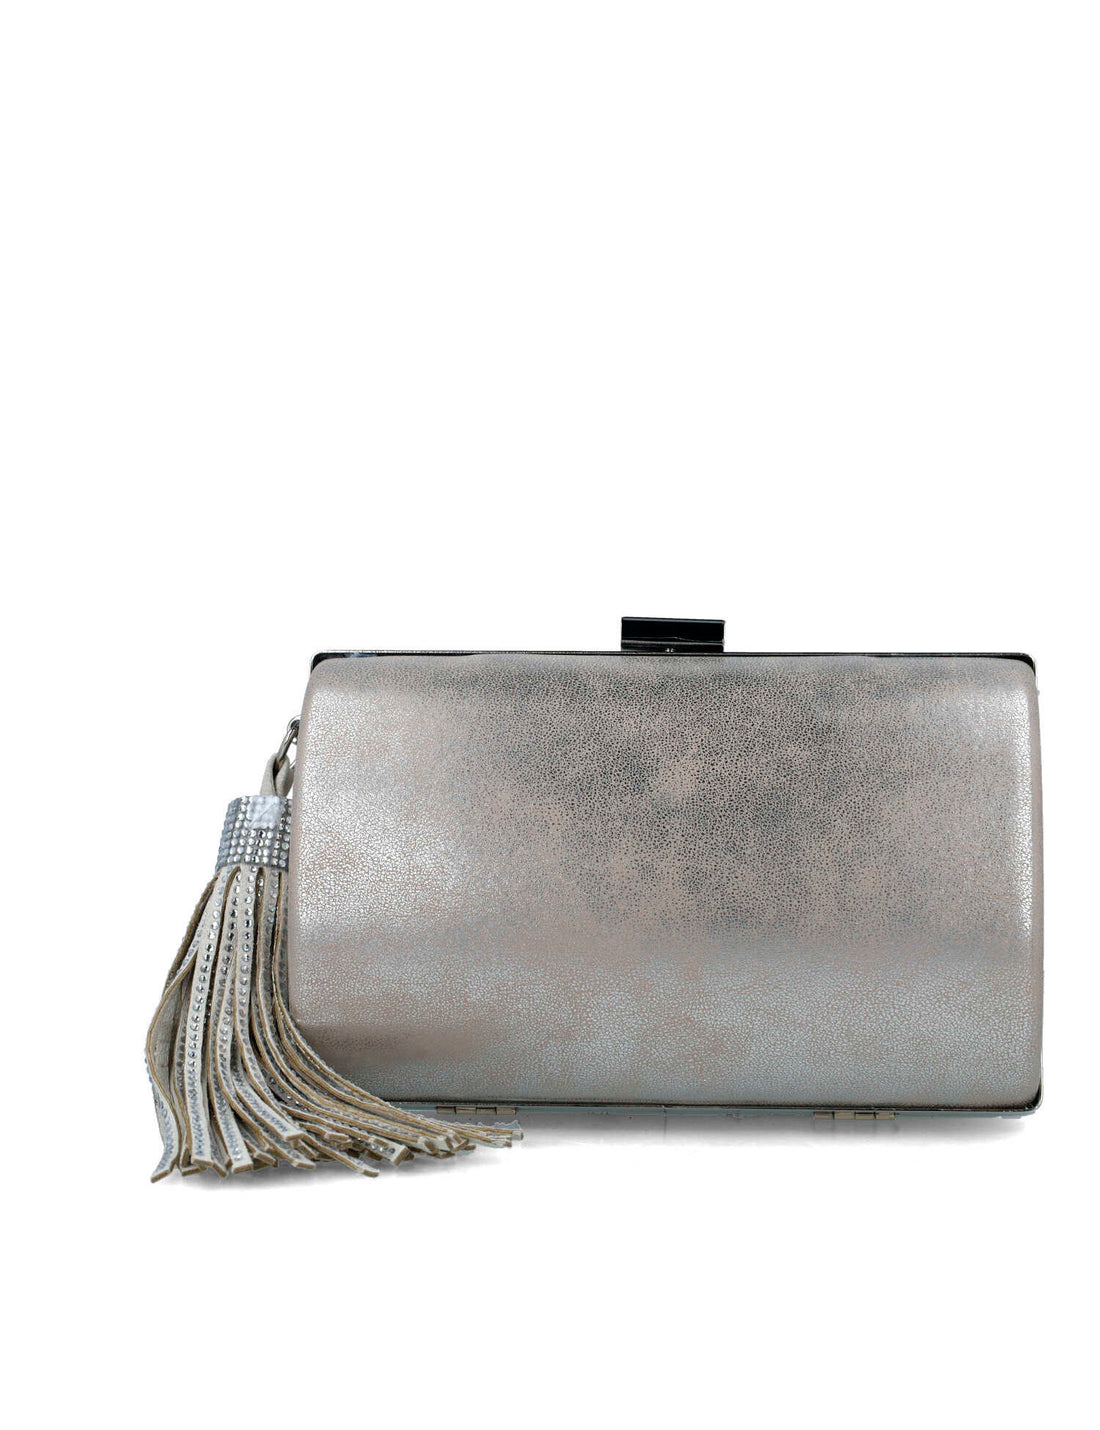 Silver Clutch With Fringe Accessory_85651_09_01